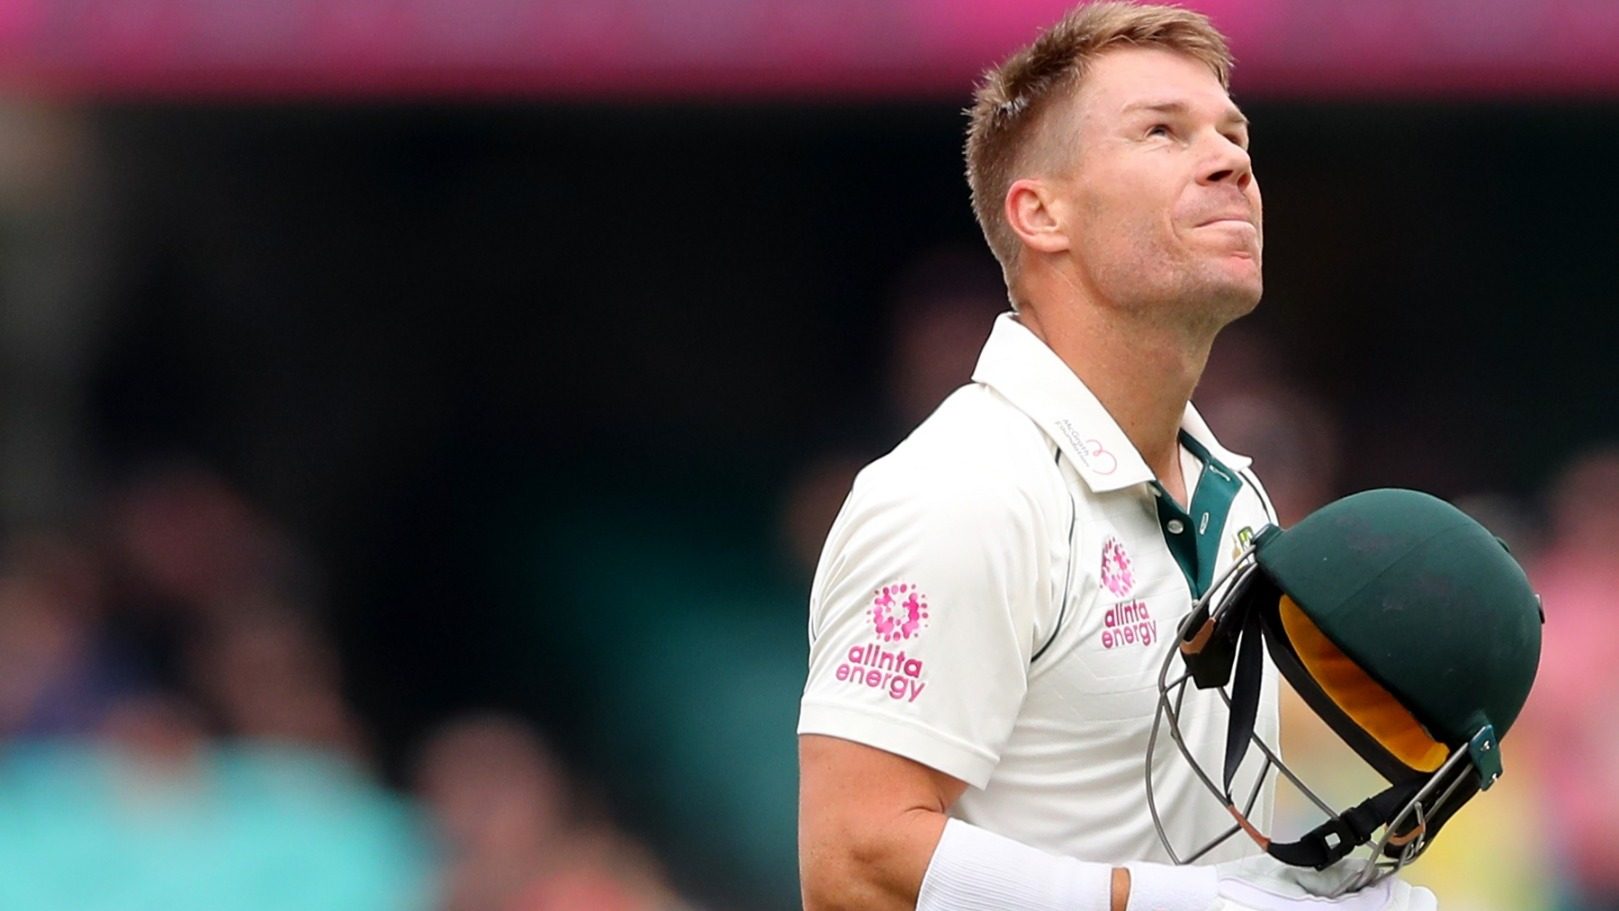 Warner makes young fan's day with heartwarming gesture